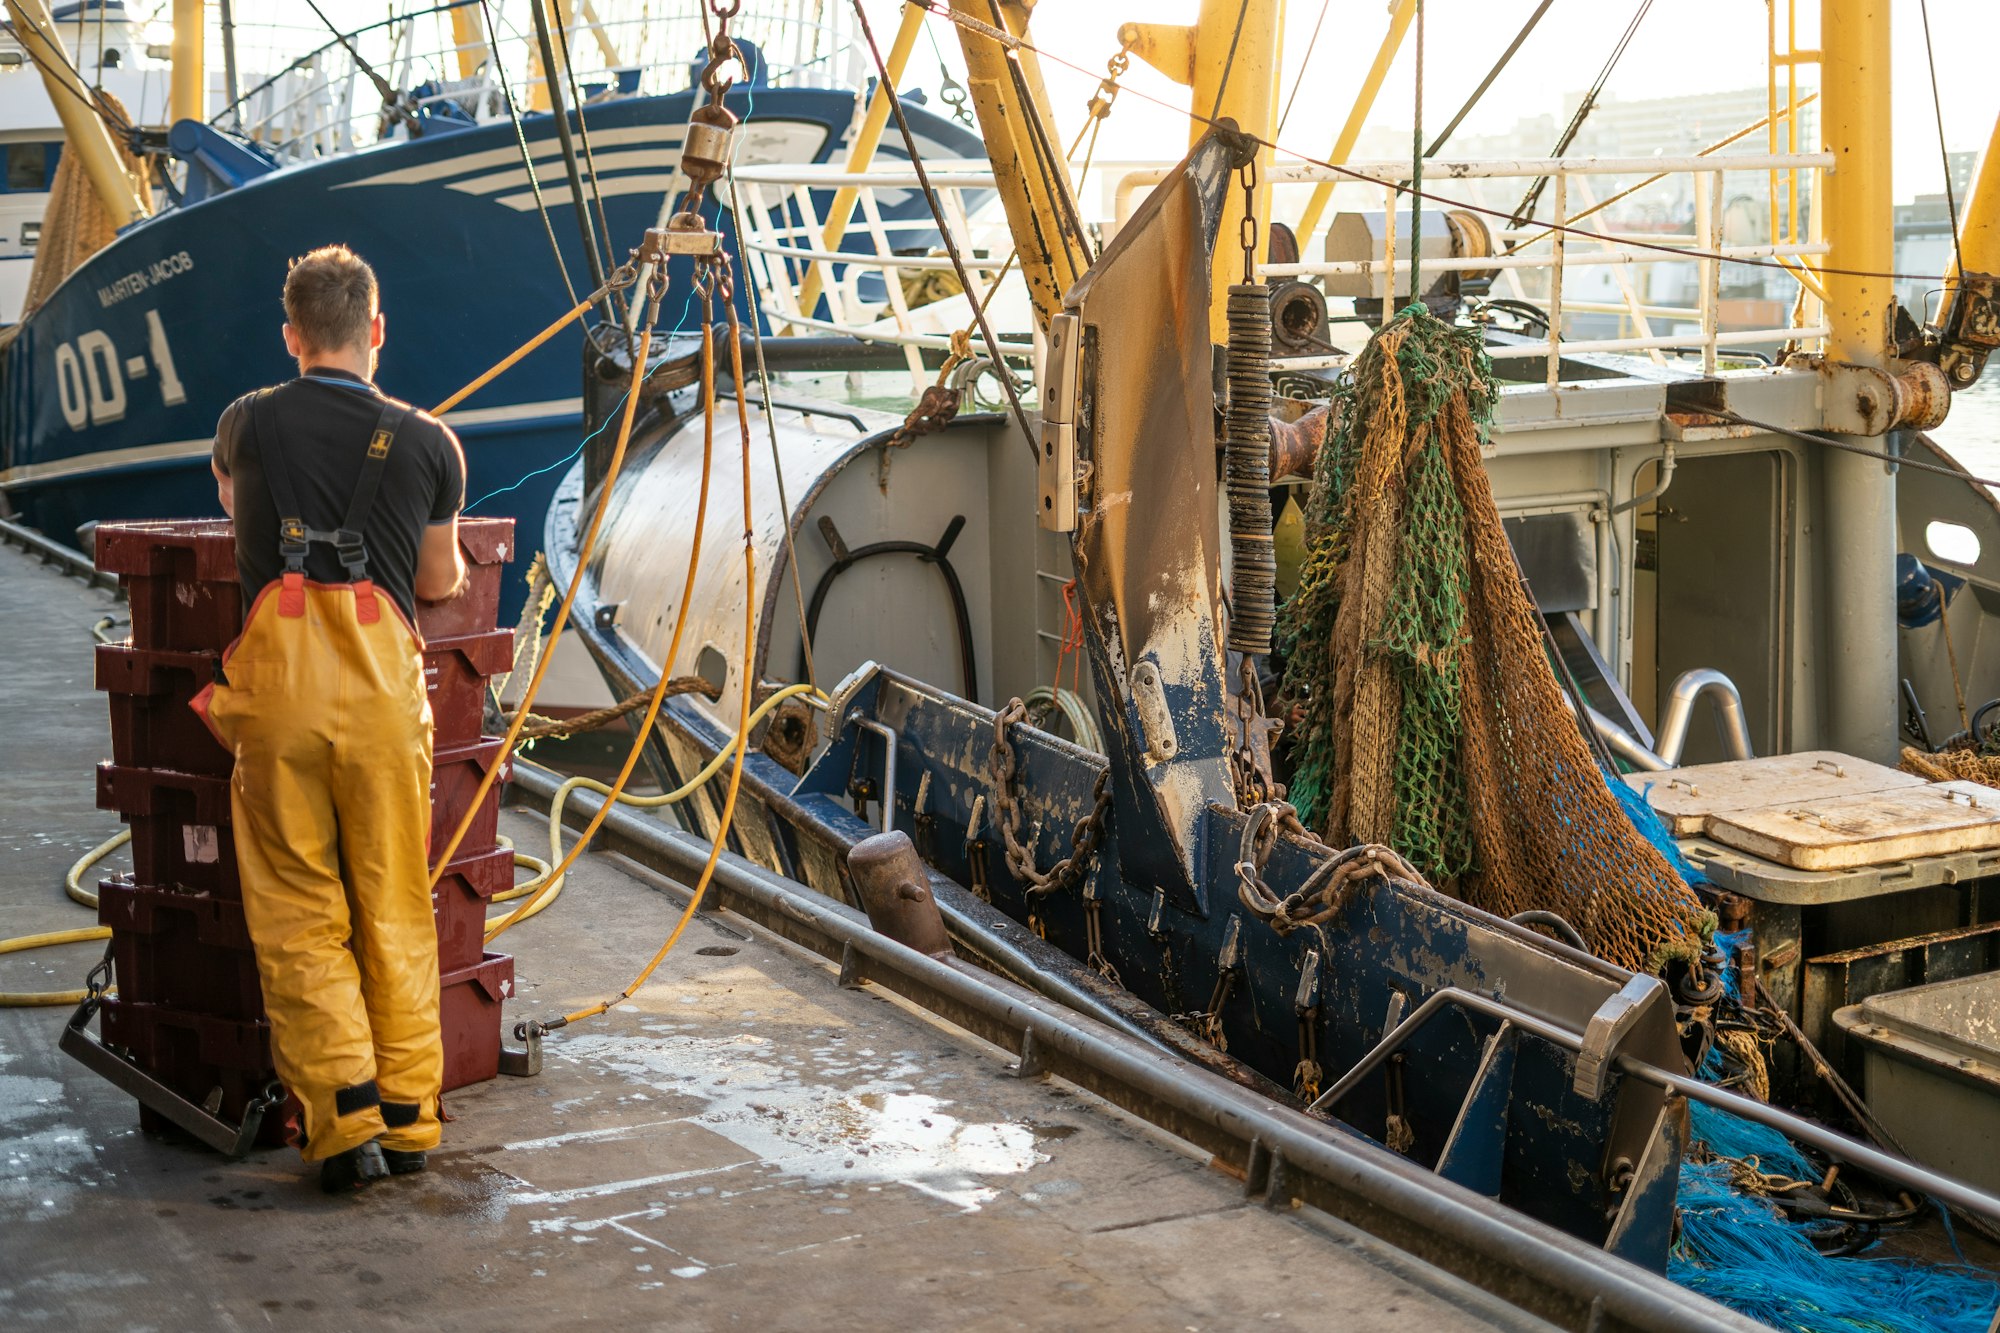 More sustainable fishing practices are encouraged worldwide